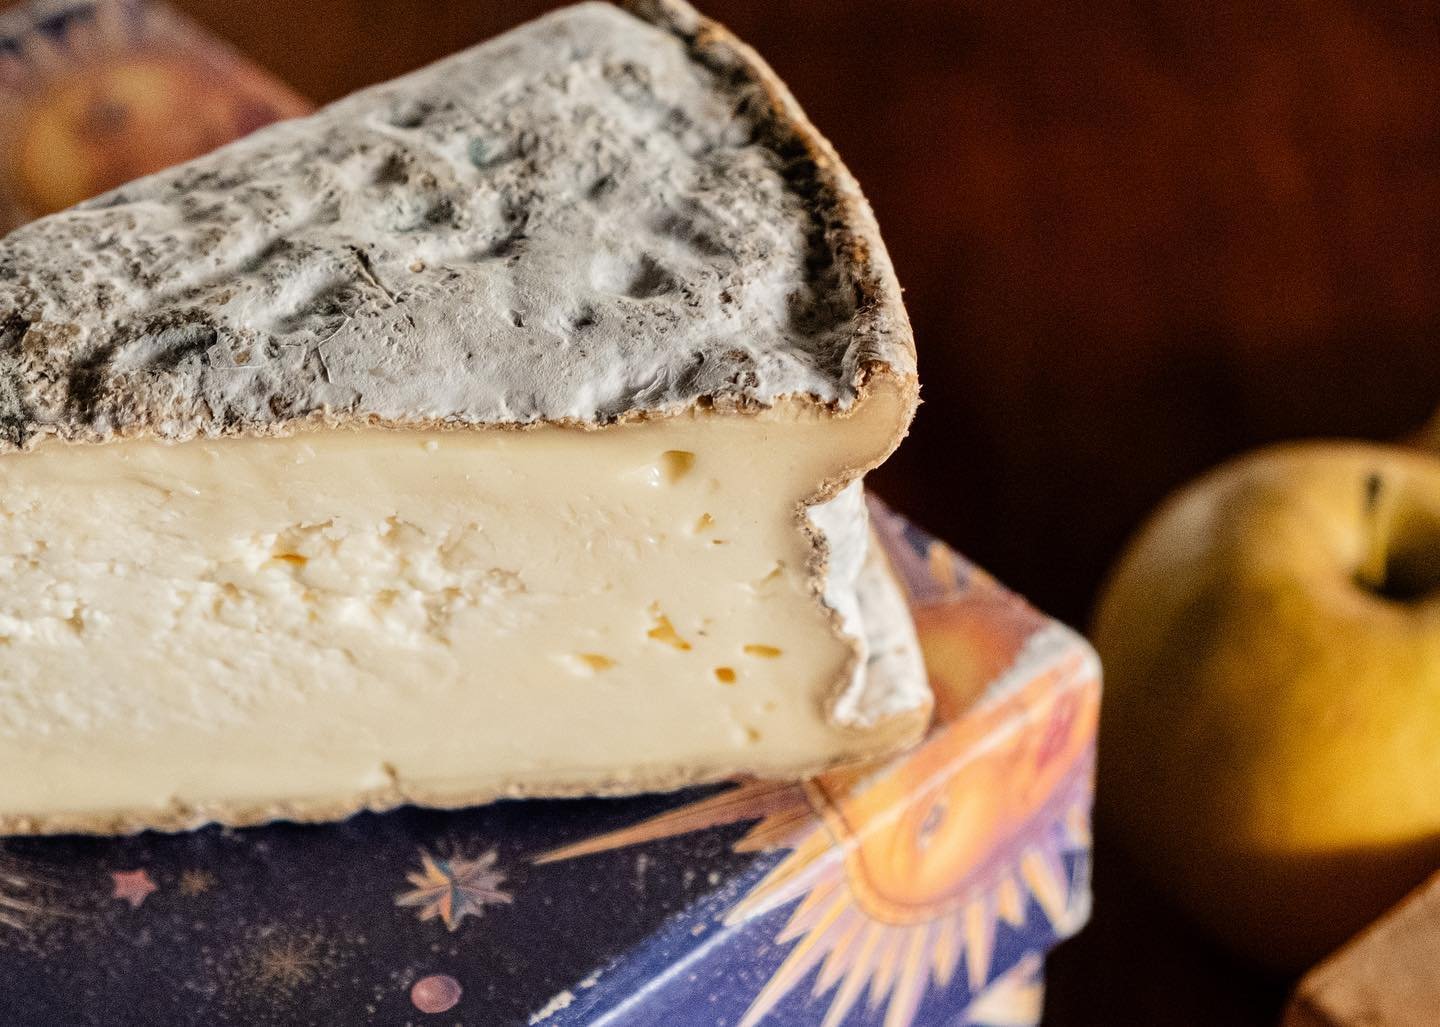 👏Please give a warm welcome to the newest cheese to our blue label collection: Caspian!

Caspian is a Jasper Hill Farm original with its stylistic roots in the French region of Savoie. This cheese takes its name from Lake Caspian&mdash;Greensboro&rs